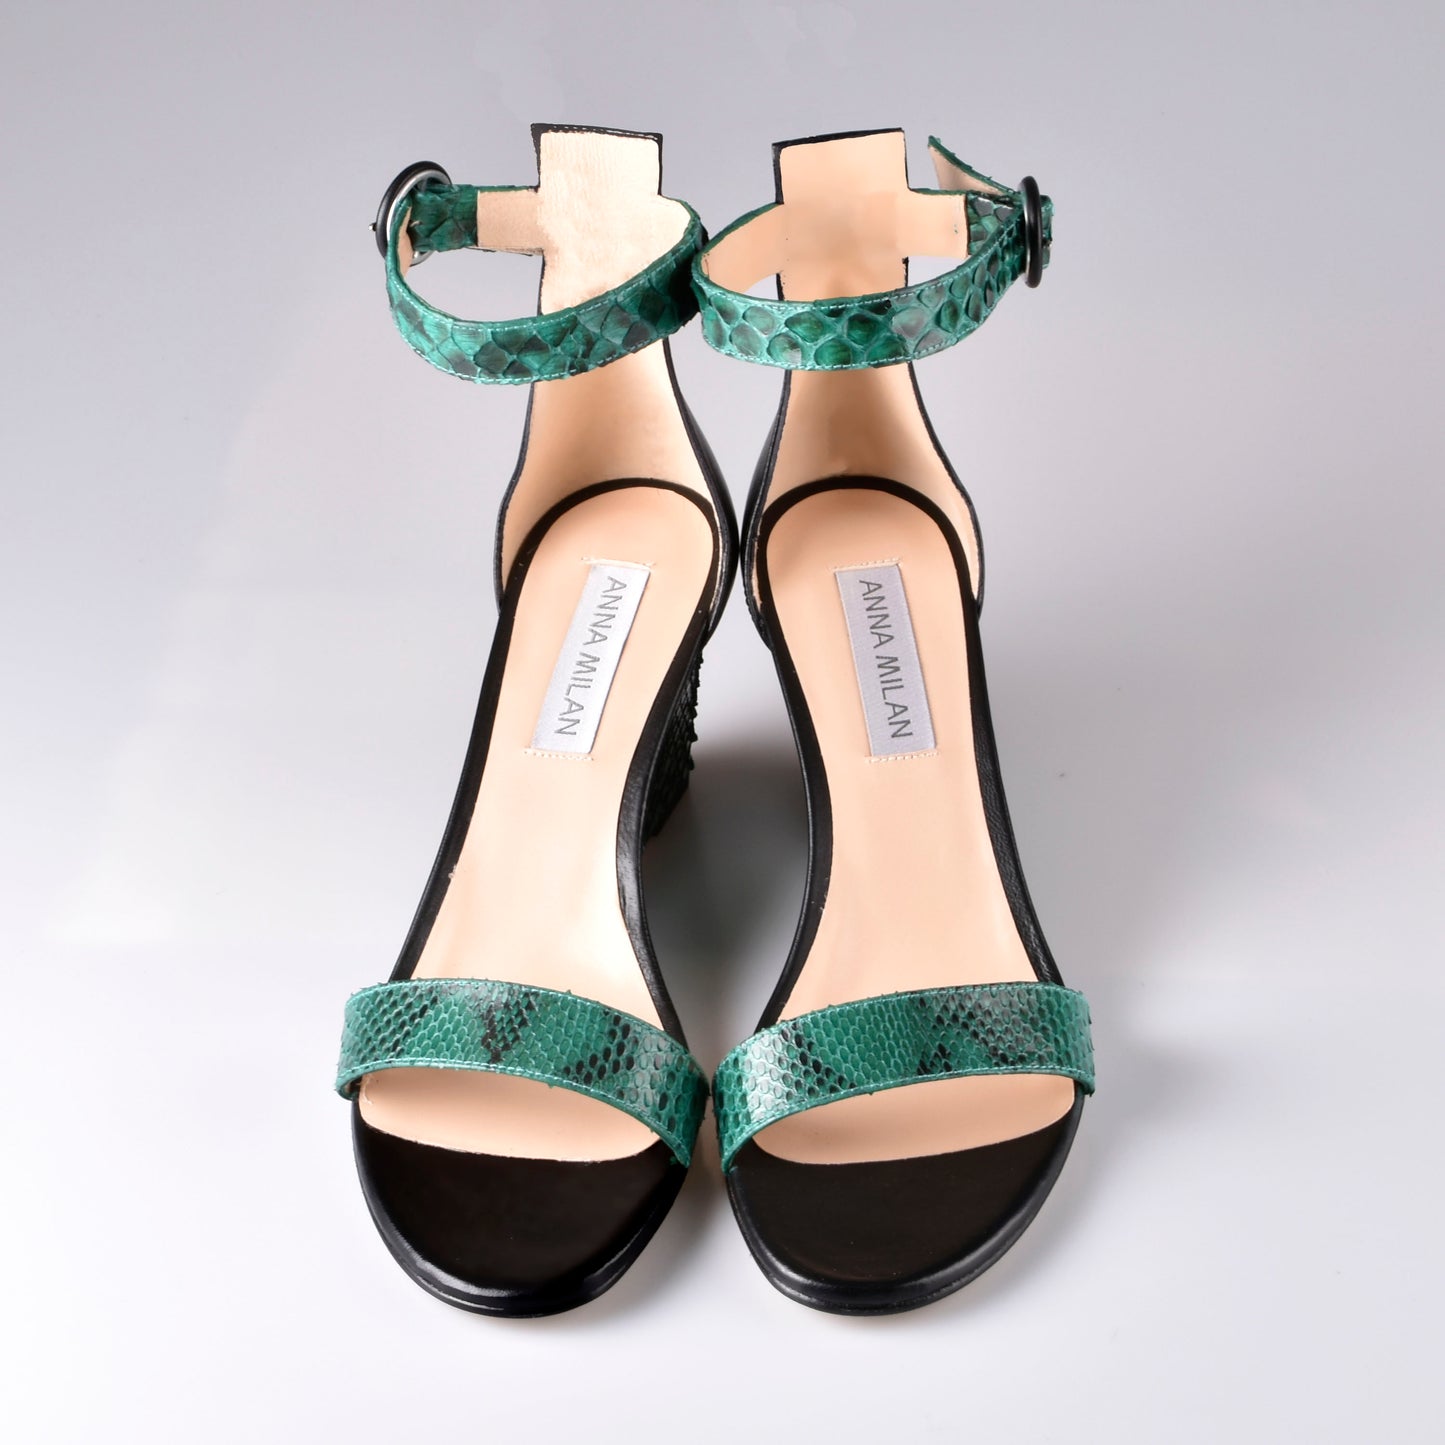 Green and black wedge sandals